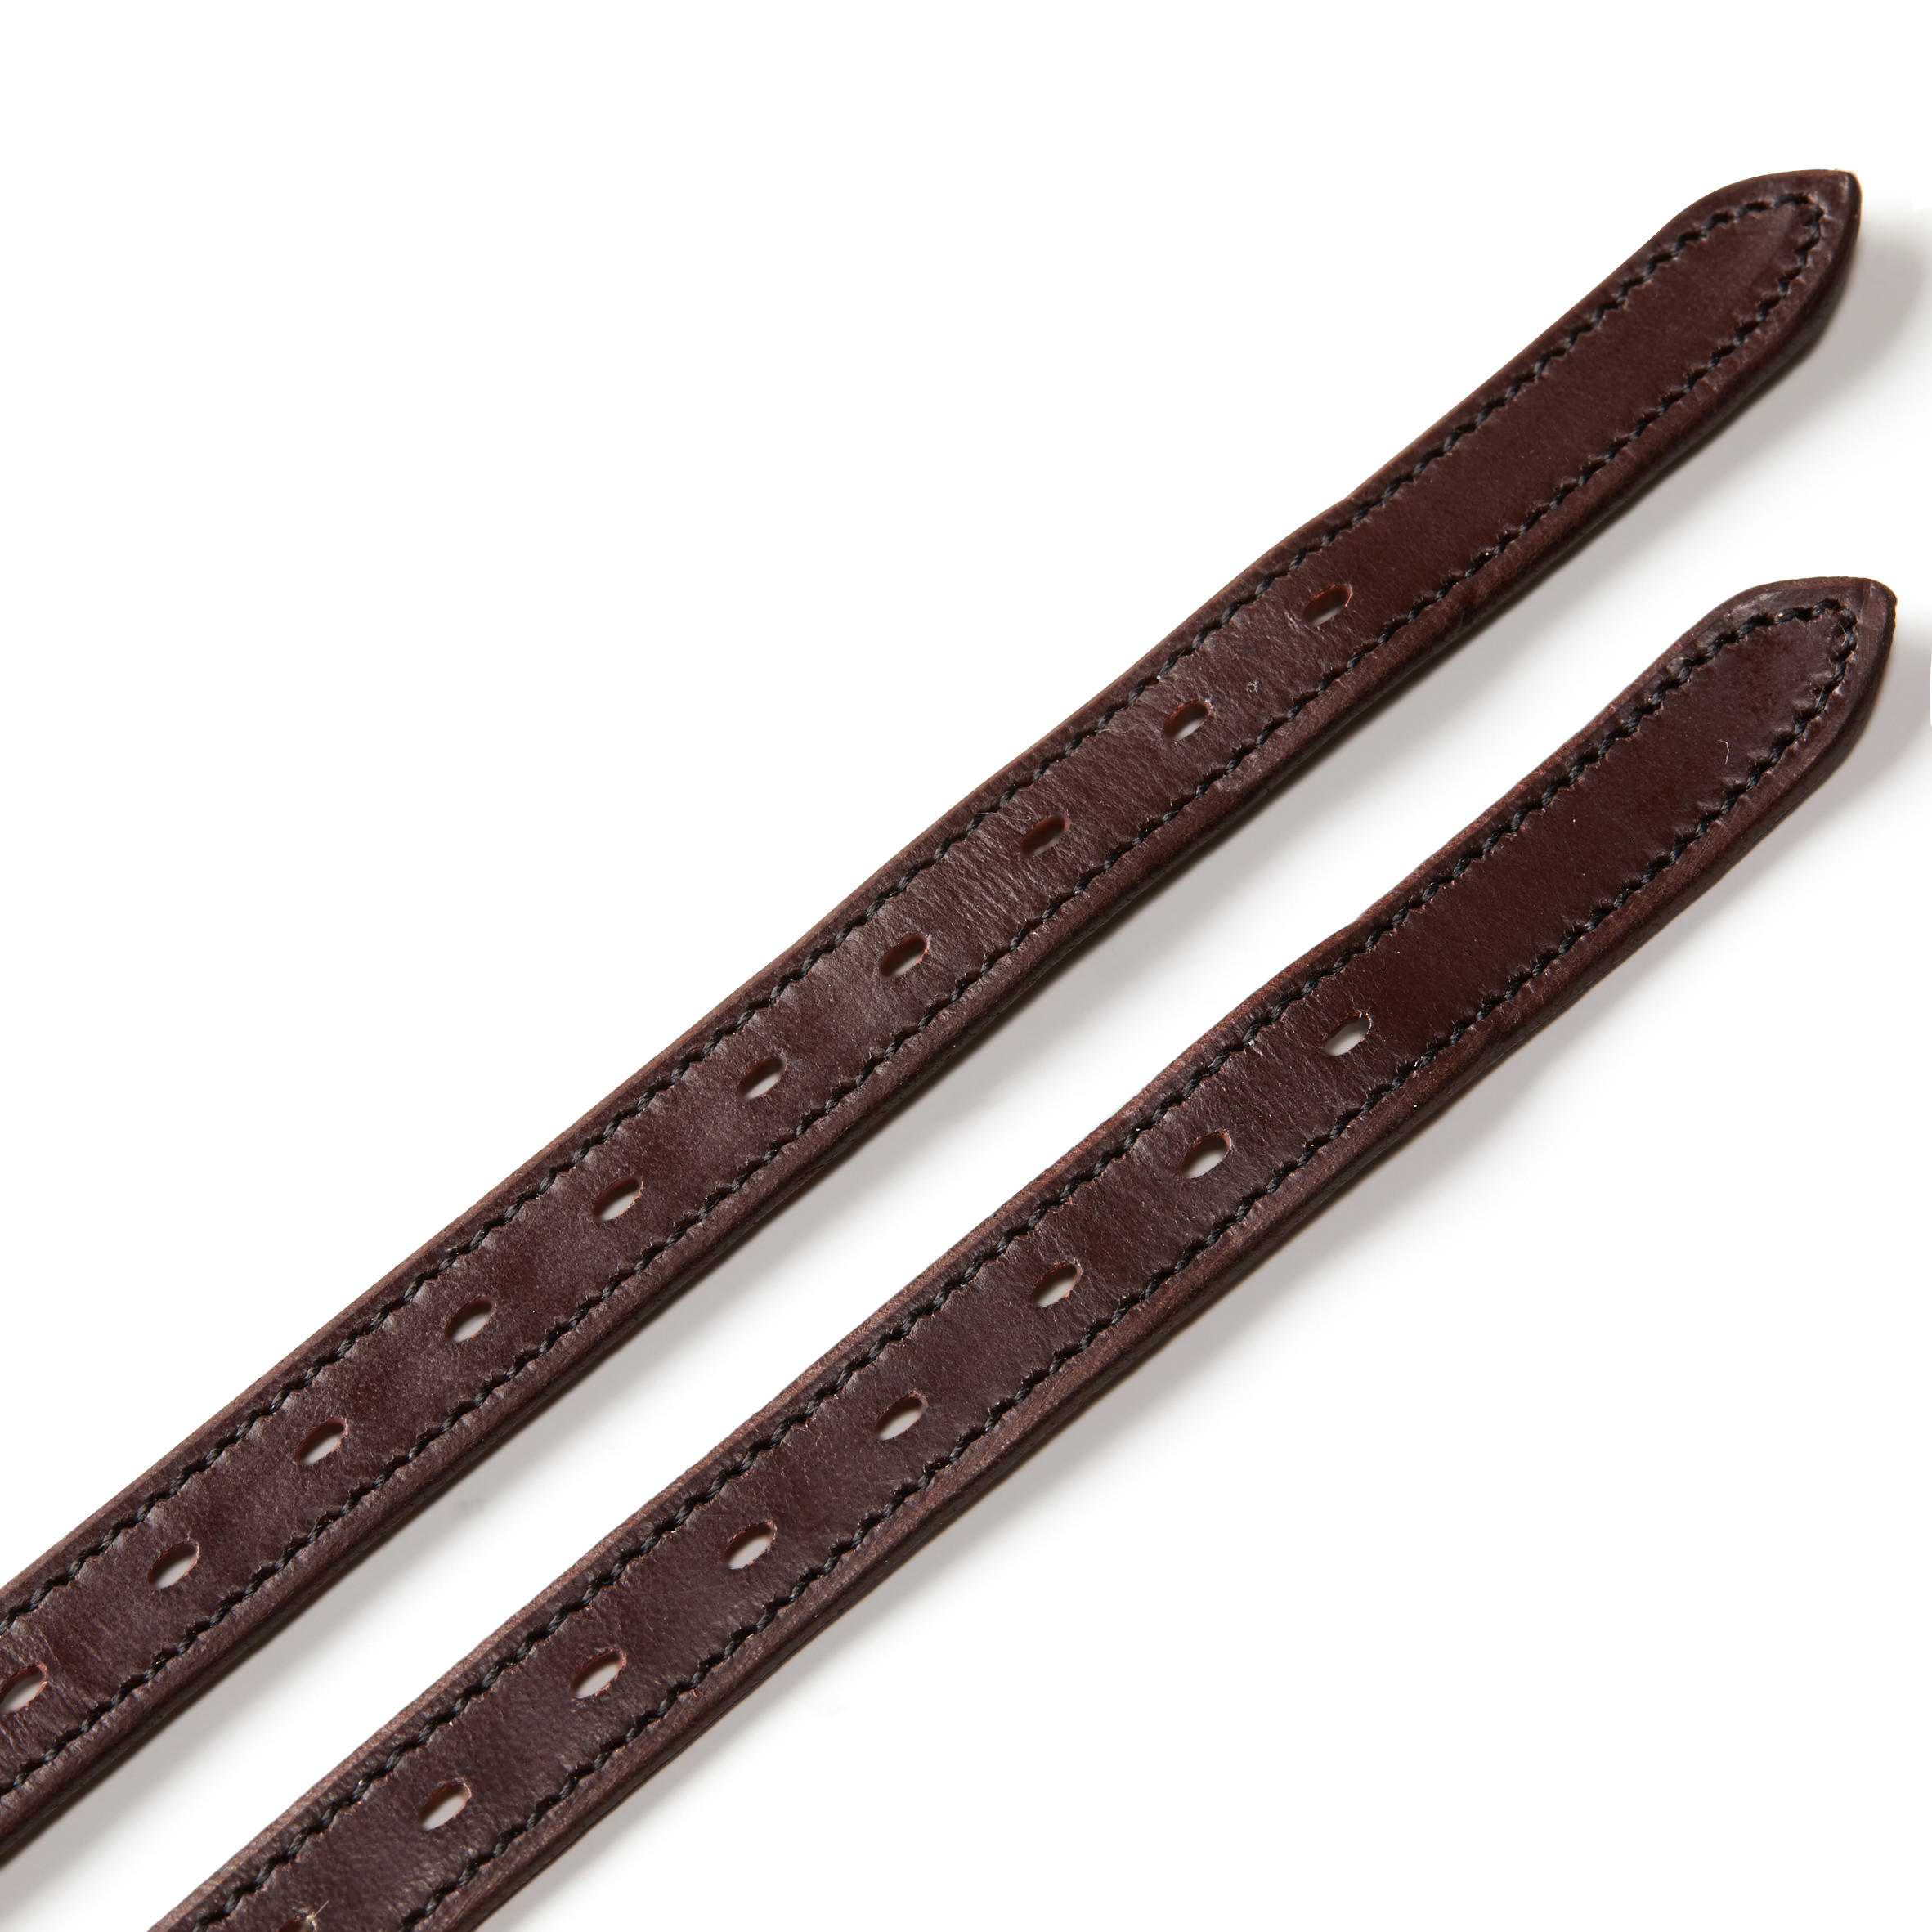 500 Horse Riding Leather Spur Straps - Brown 3/3